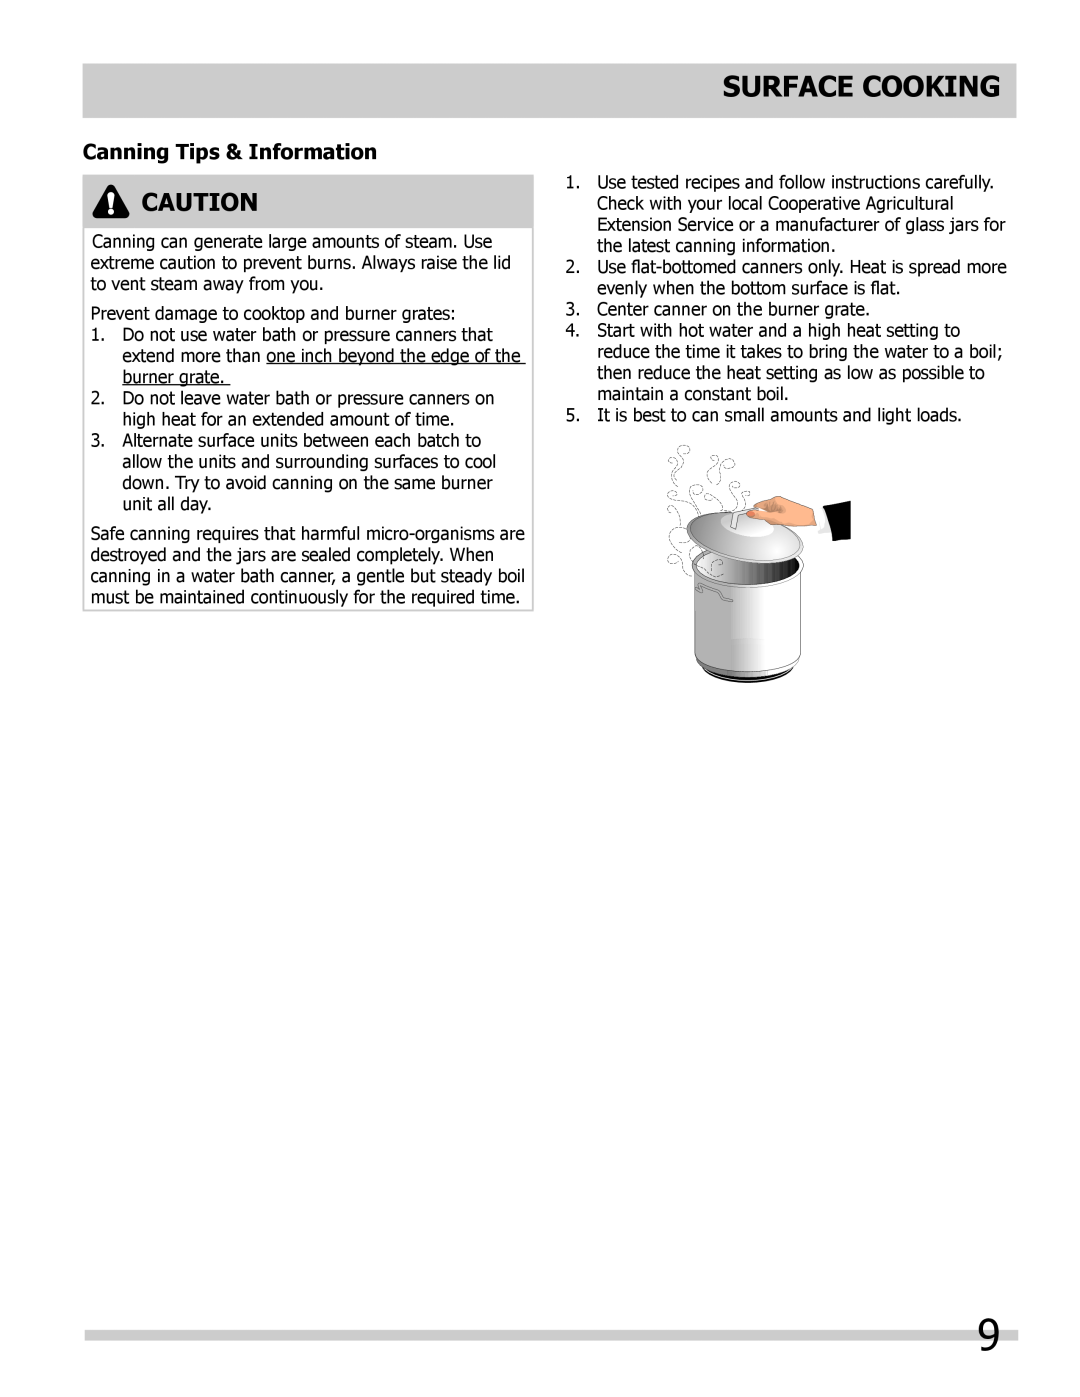 Frigidaire FPDF4085KF important safety instructions Canning Tips & Information, surface cooking 